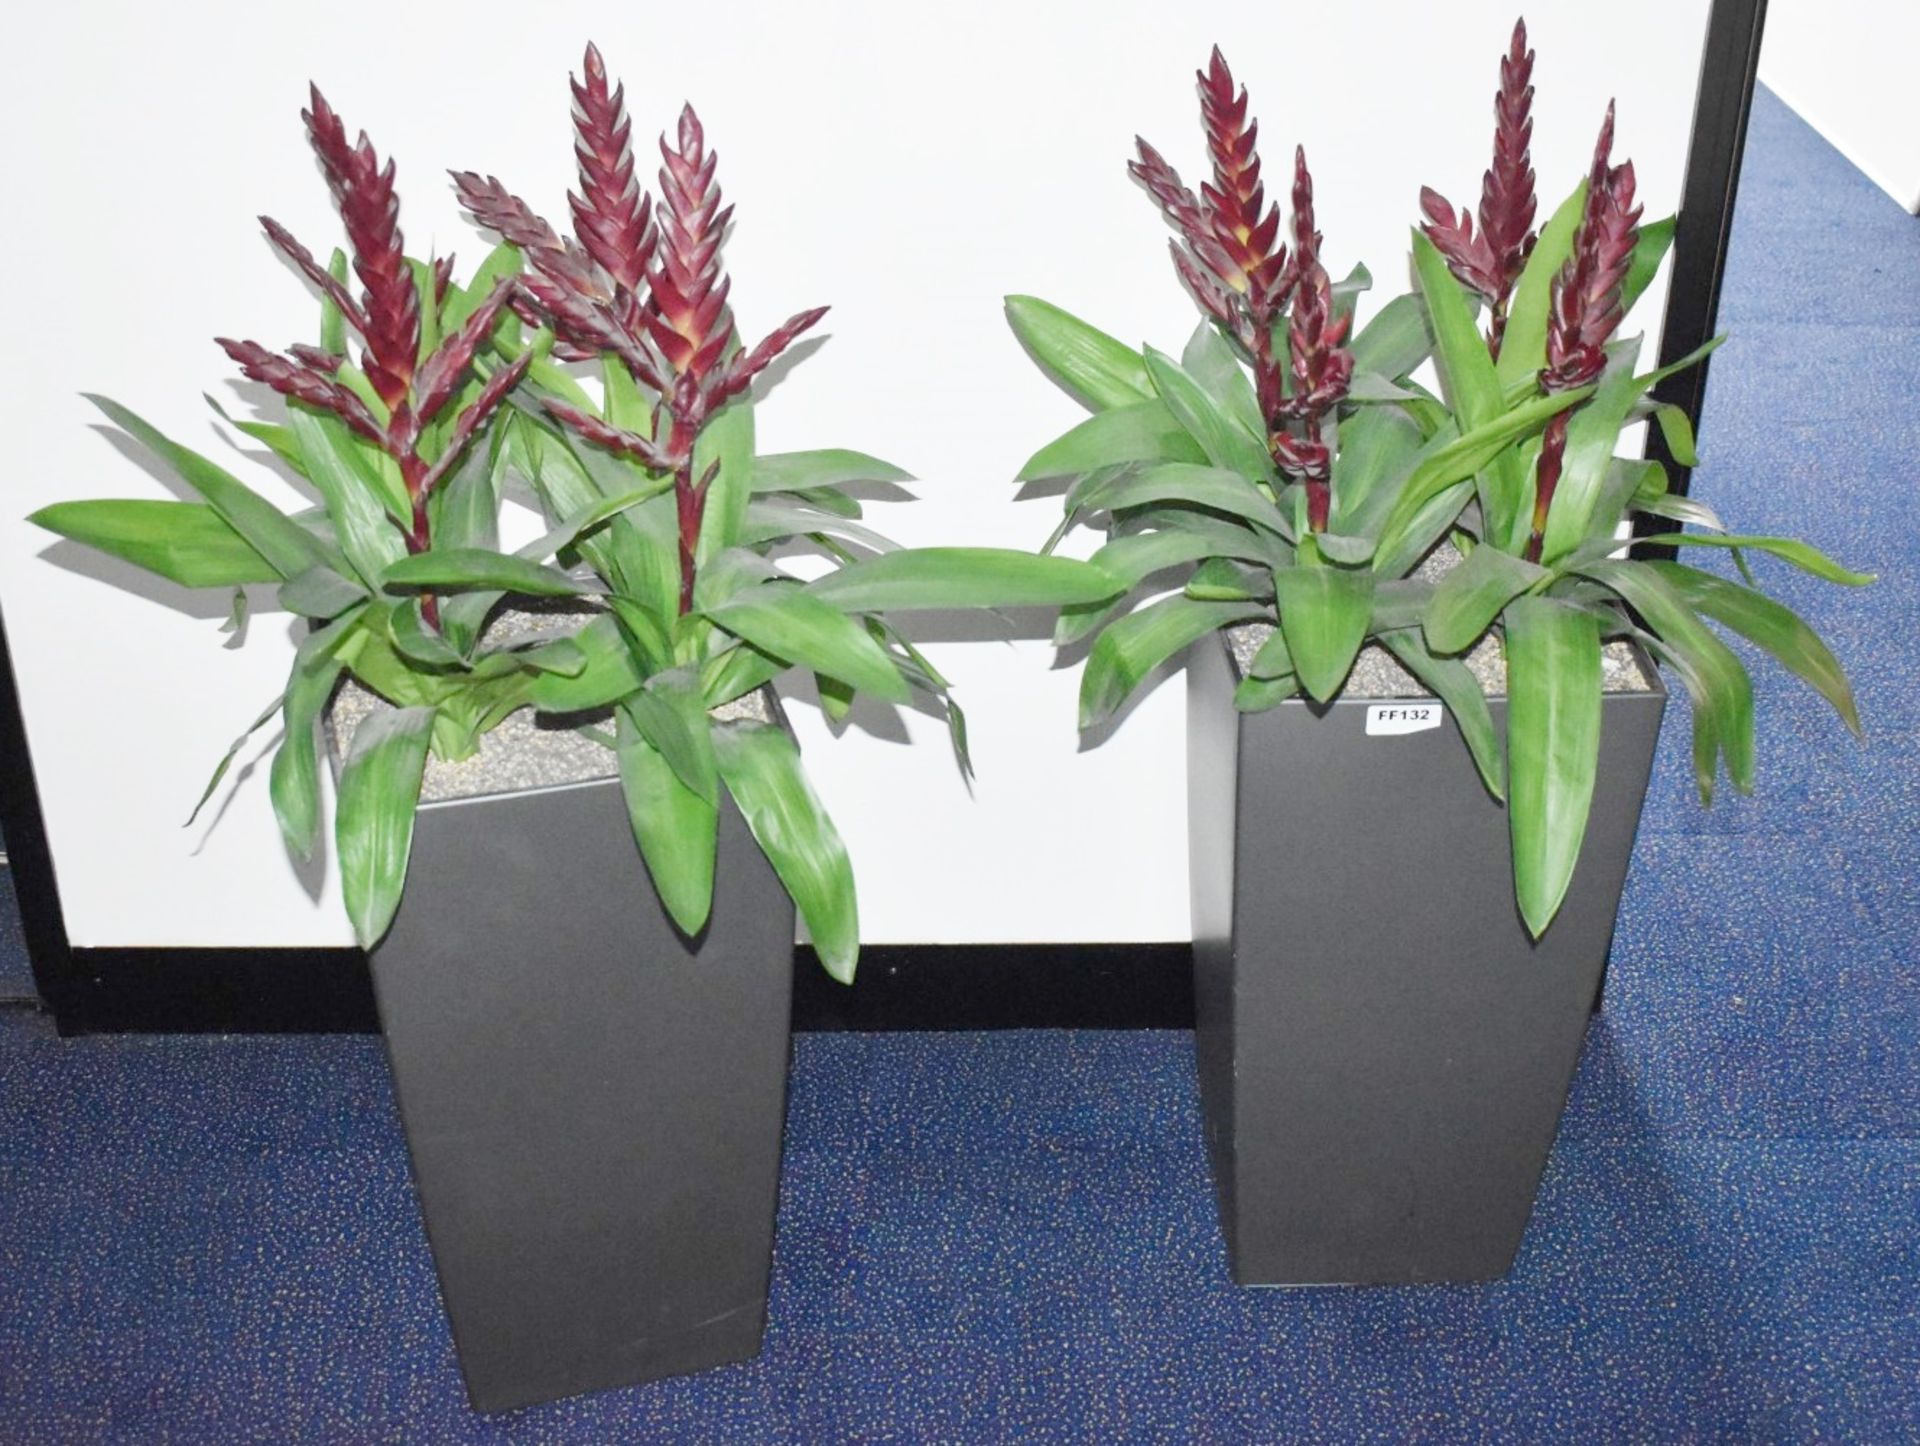 2 x Artificial Plants With Planters - Overall Height 97cm Approx - Ref: FF132 U - CL544 -